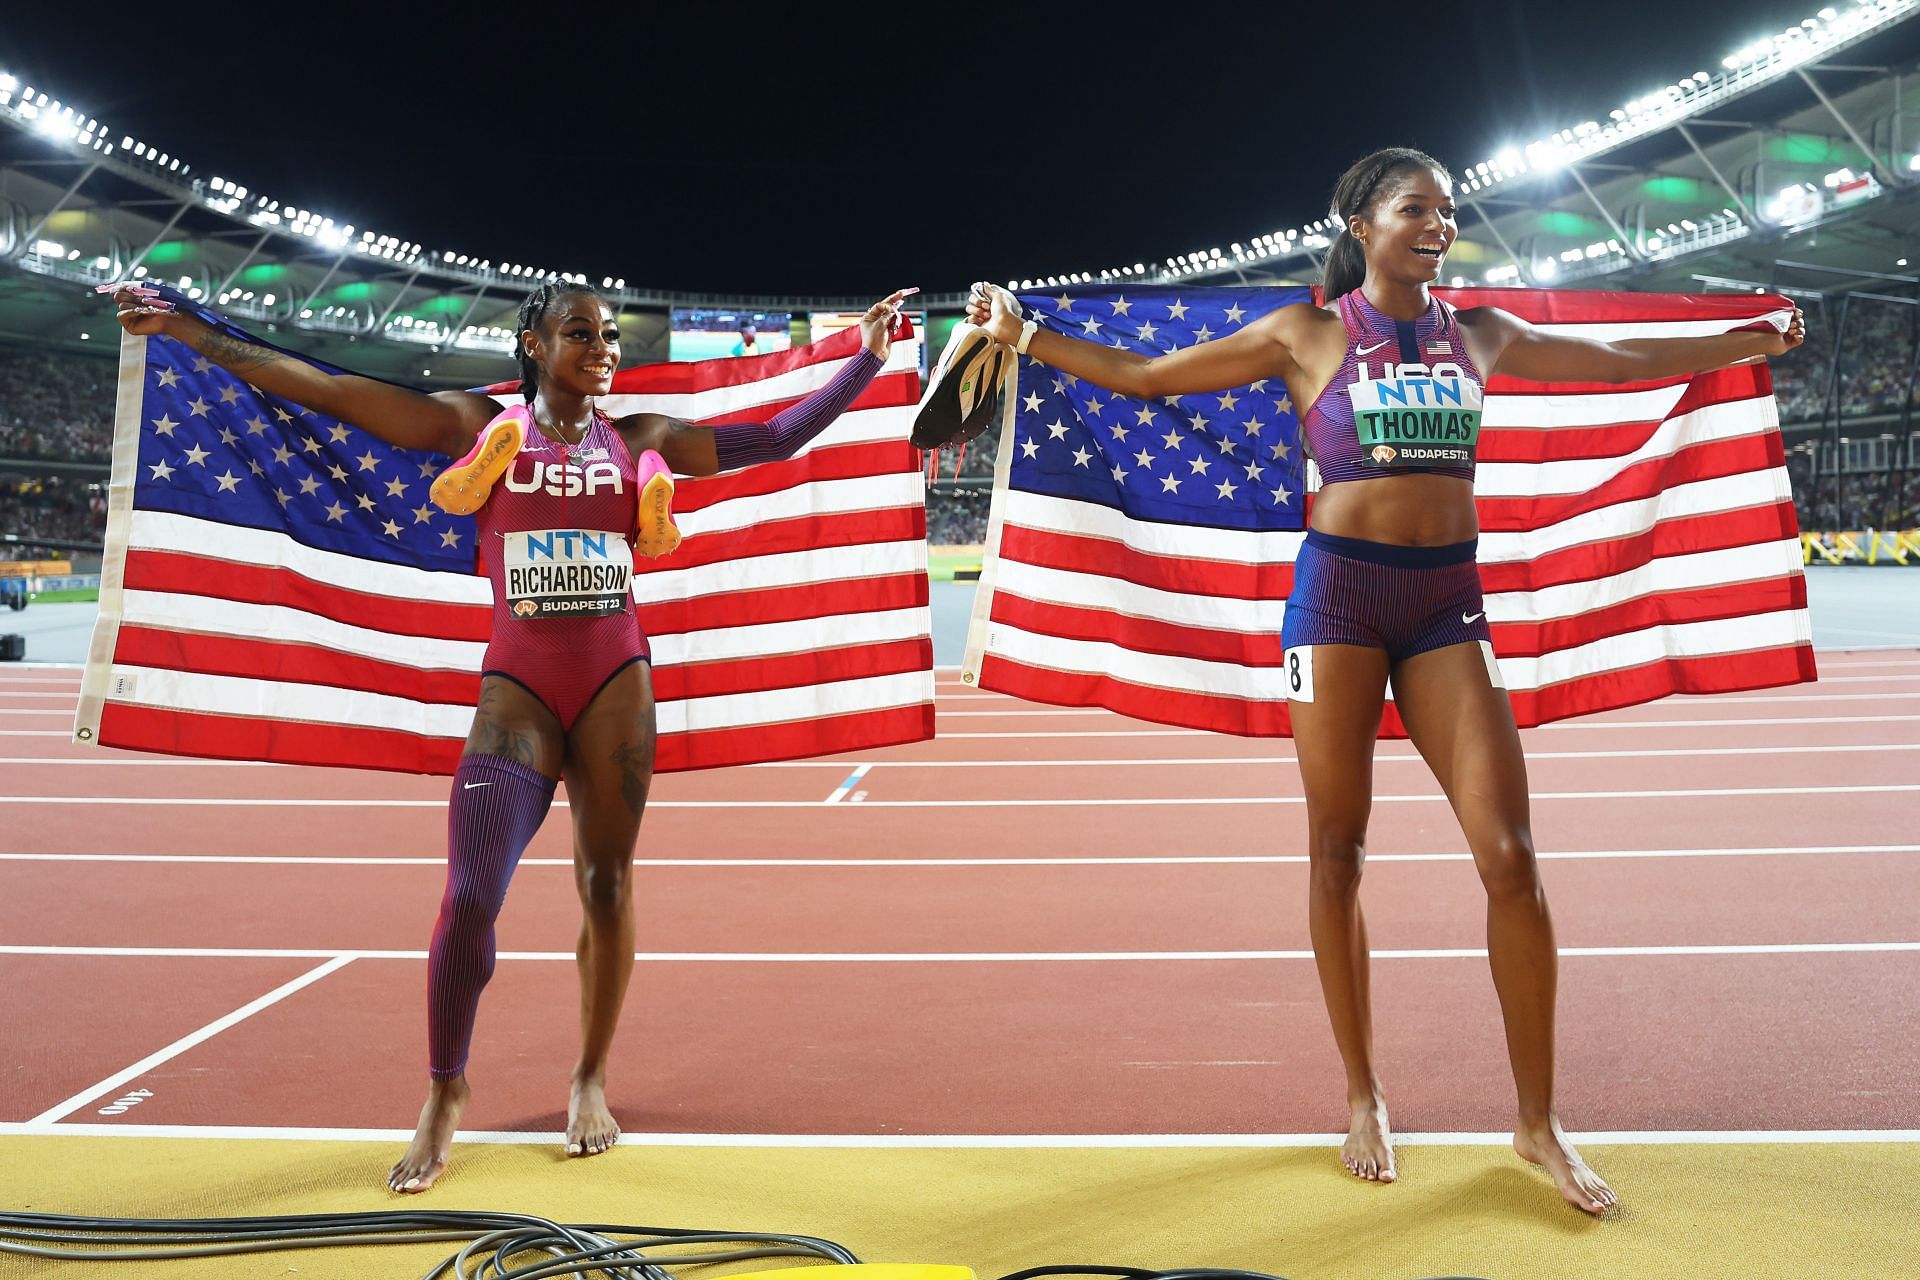 Bronze medalist Sha&#039;Carri Richardson and silver medalist Gabrielle Thomas of Team United States pose for a photo after the Women&#039;s 200m Final at the 2023 World Athletics Championships in Budapest, Hungary.